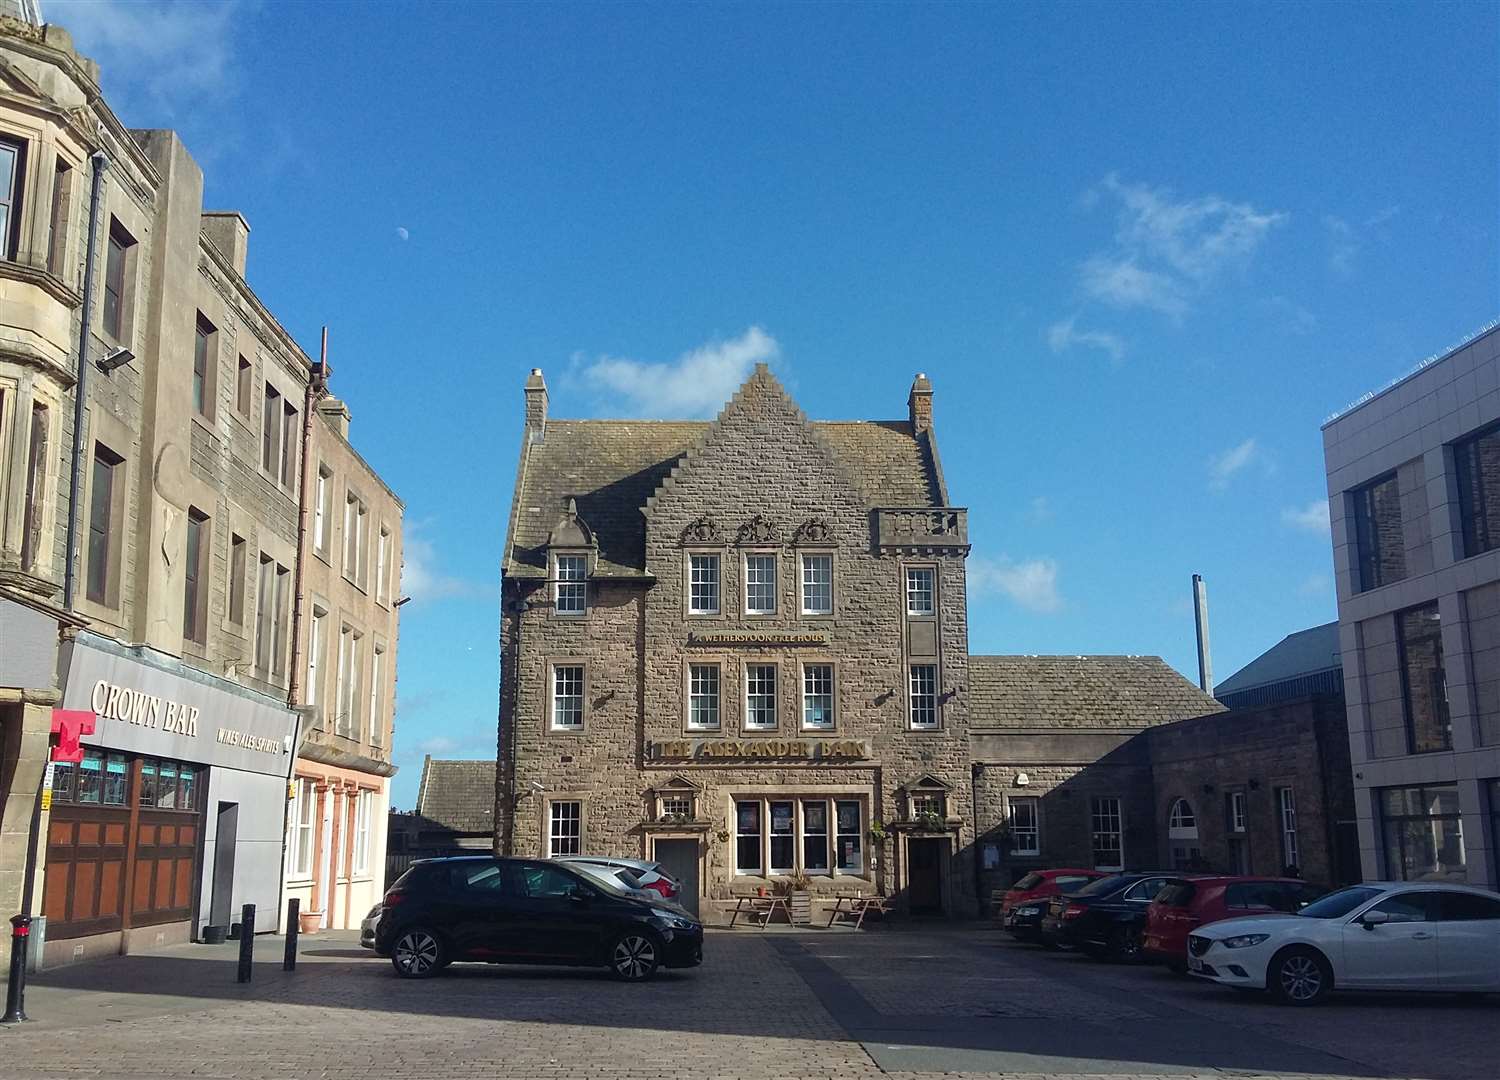 The Alexander Bain, the JD Wetherspoon pub in Wick town centre.